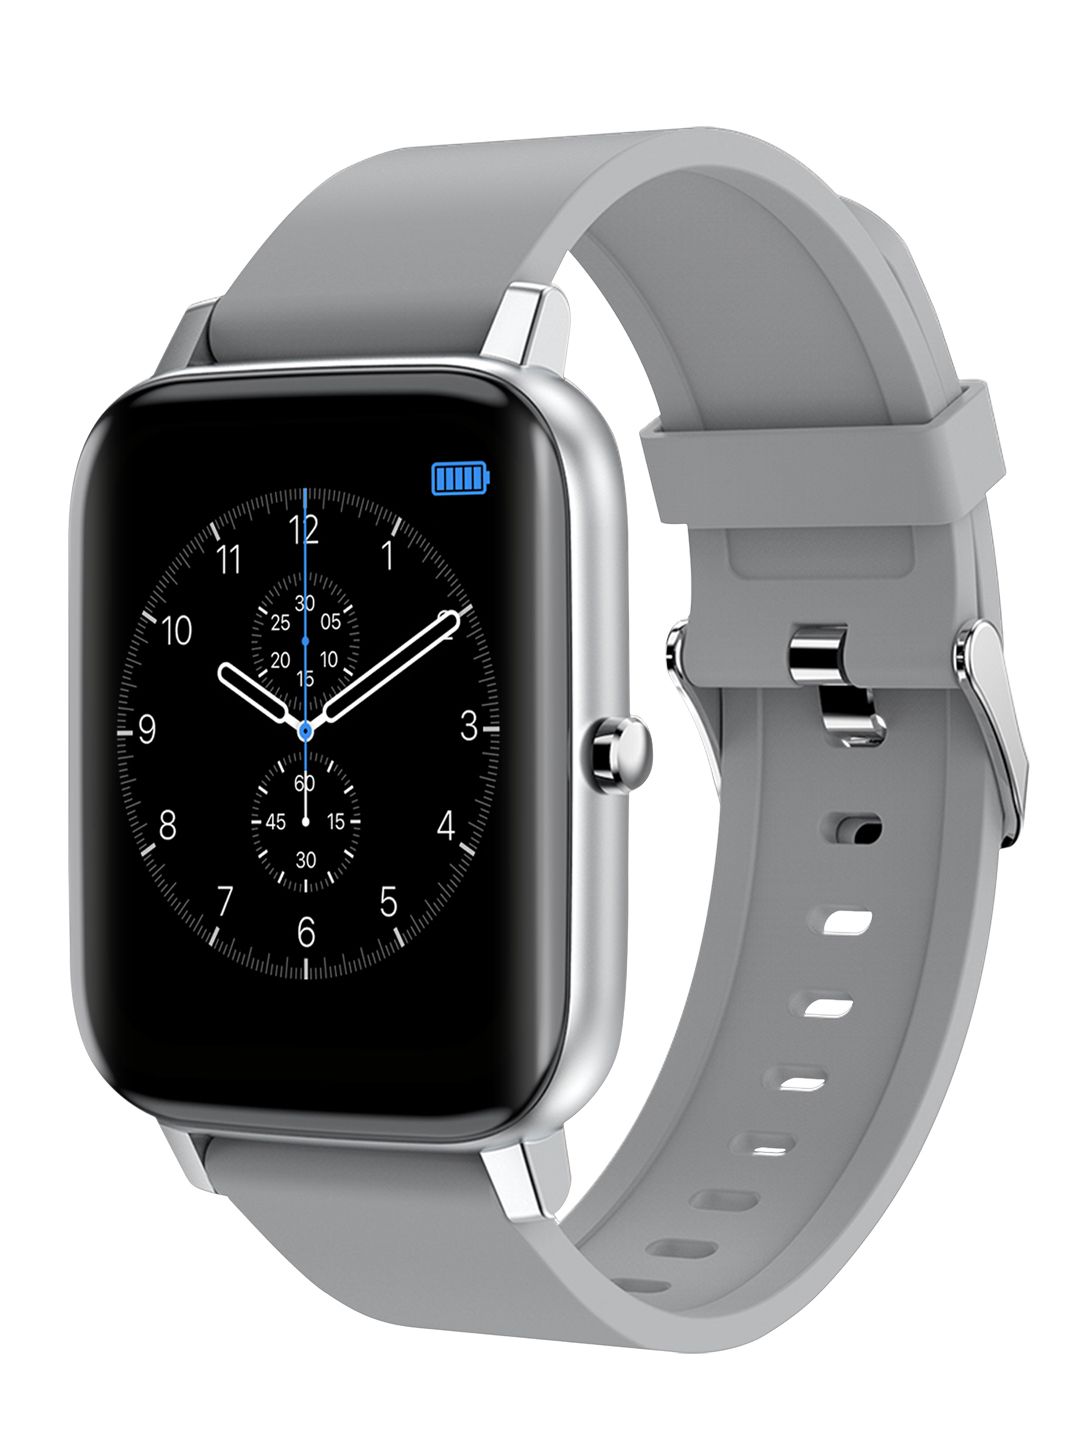 TAGG Unisex Silver Verve Plus Smartwatch Price in India